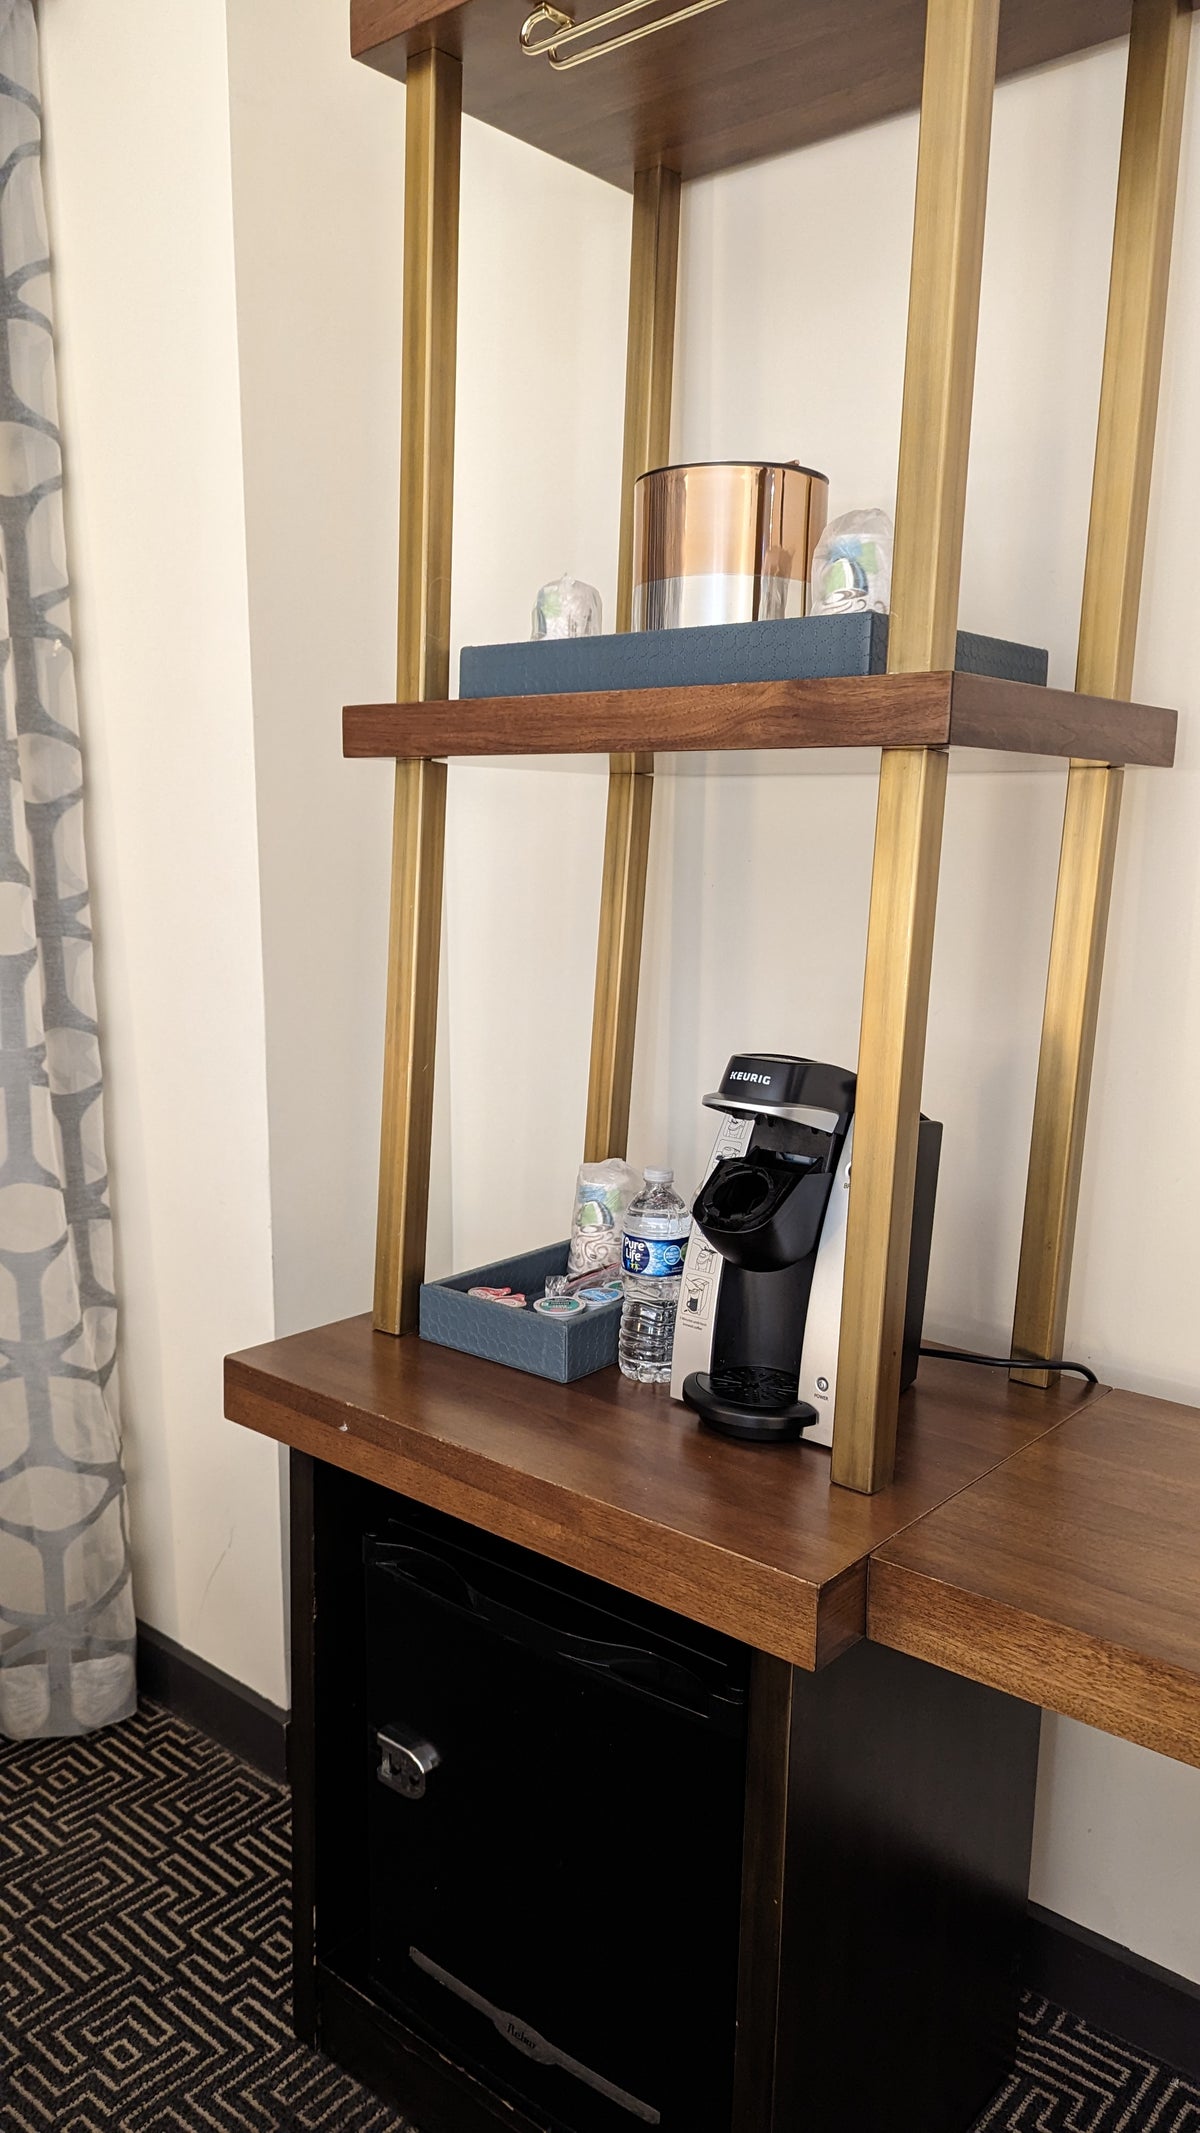 The Troubadour Hotel New Orleans guestroom coffee ice and refrigerator